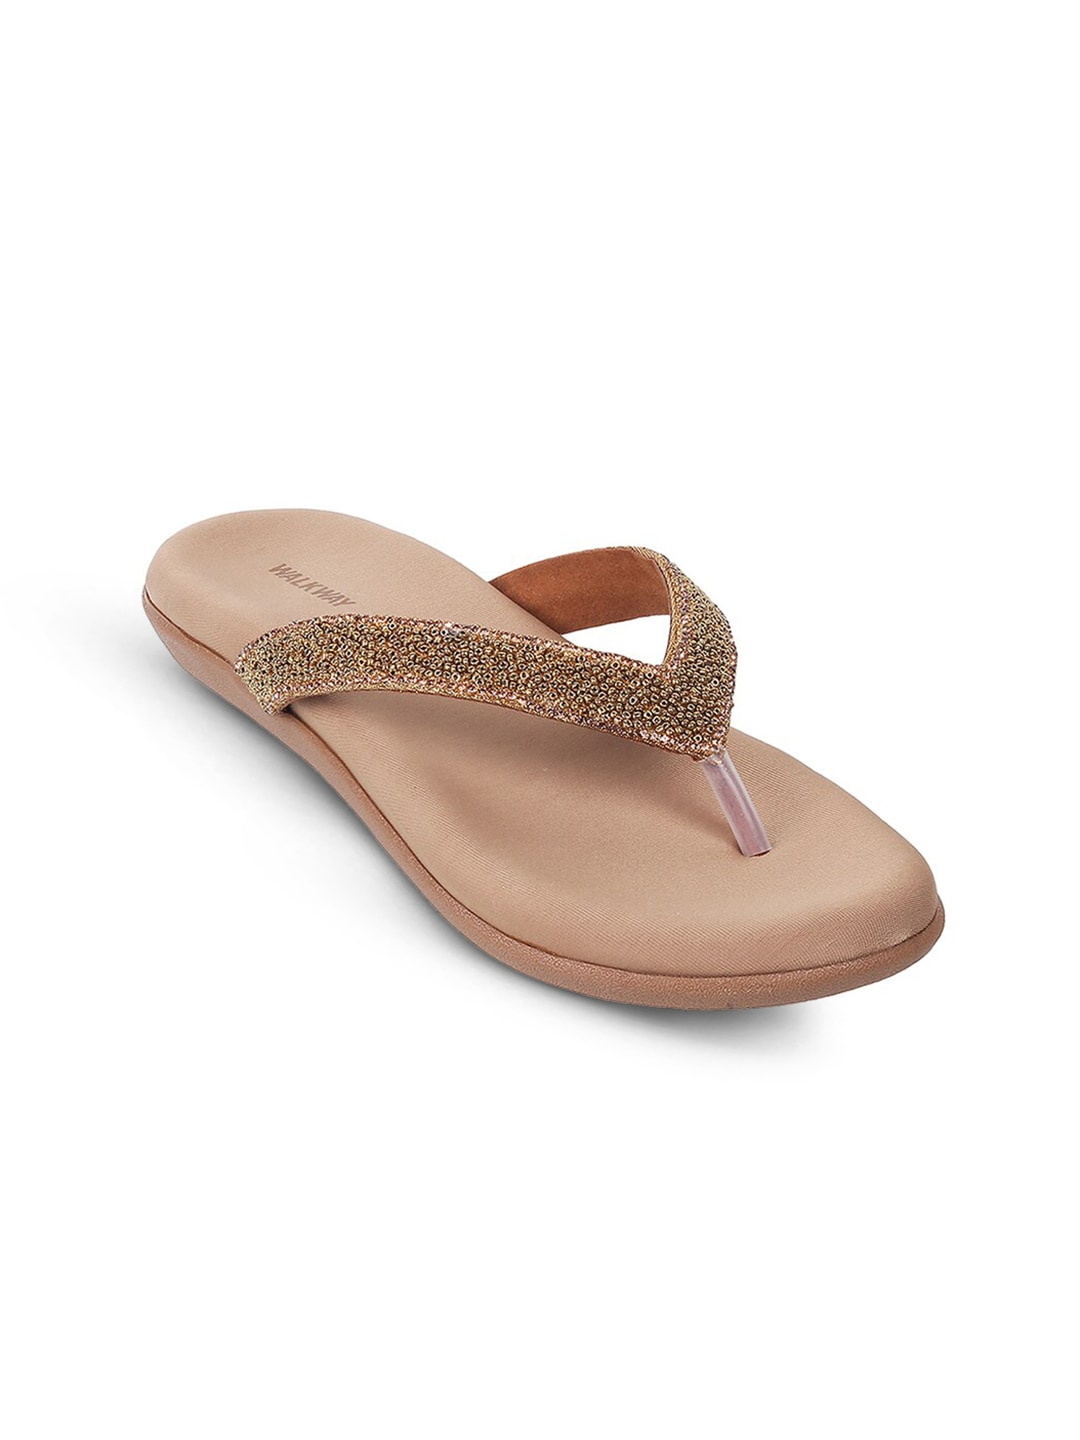 WALKWAY by Metro Embellished Open Toe Flats Price in India